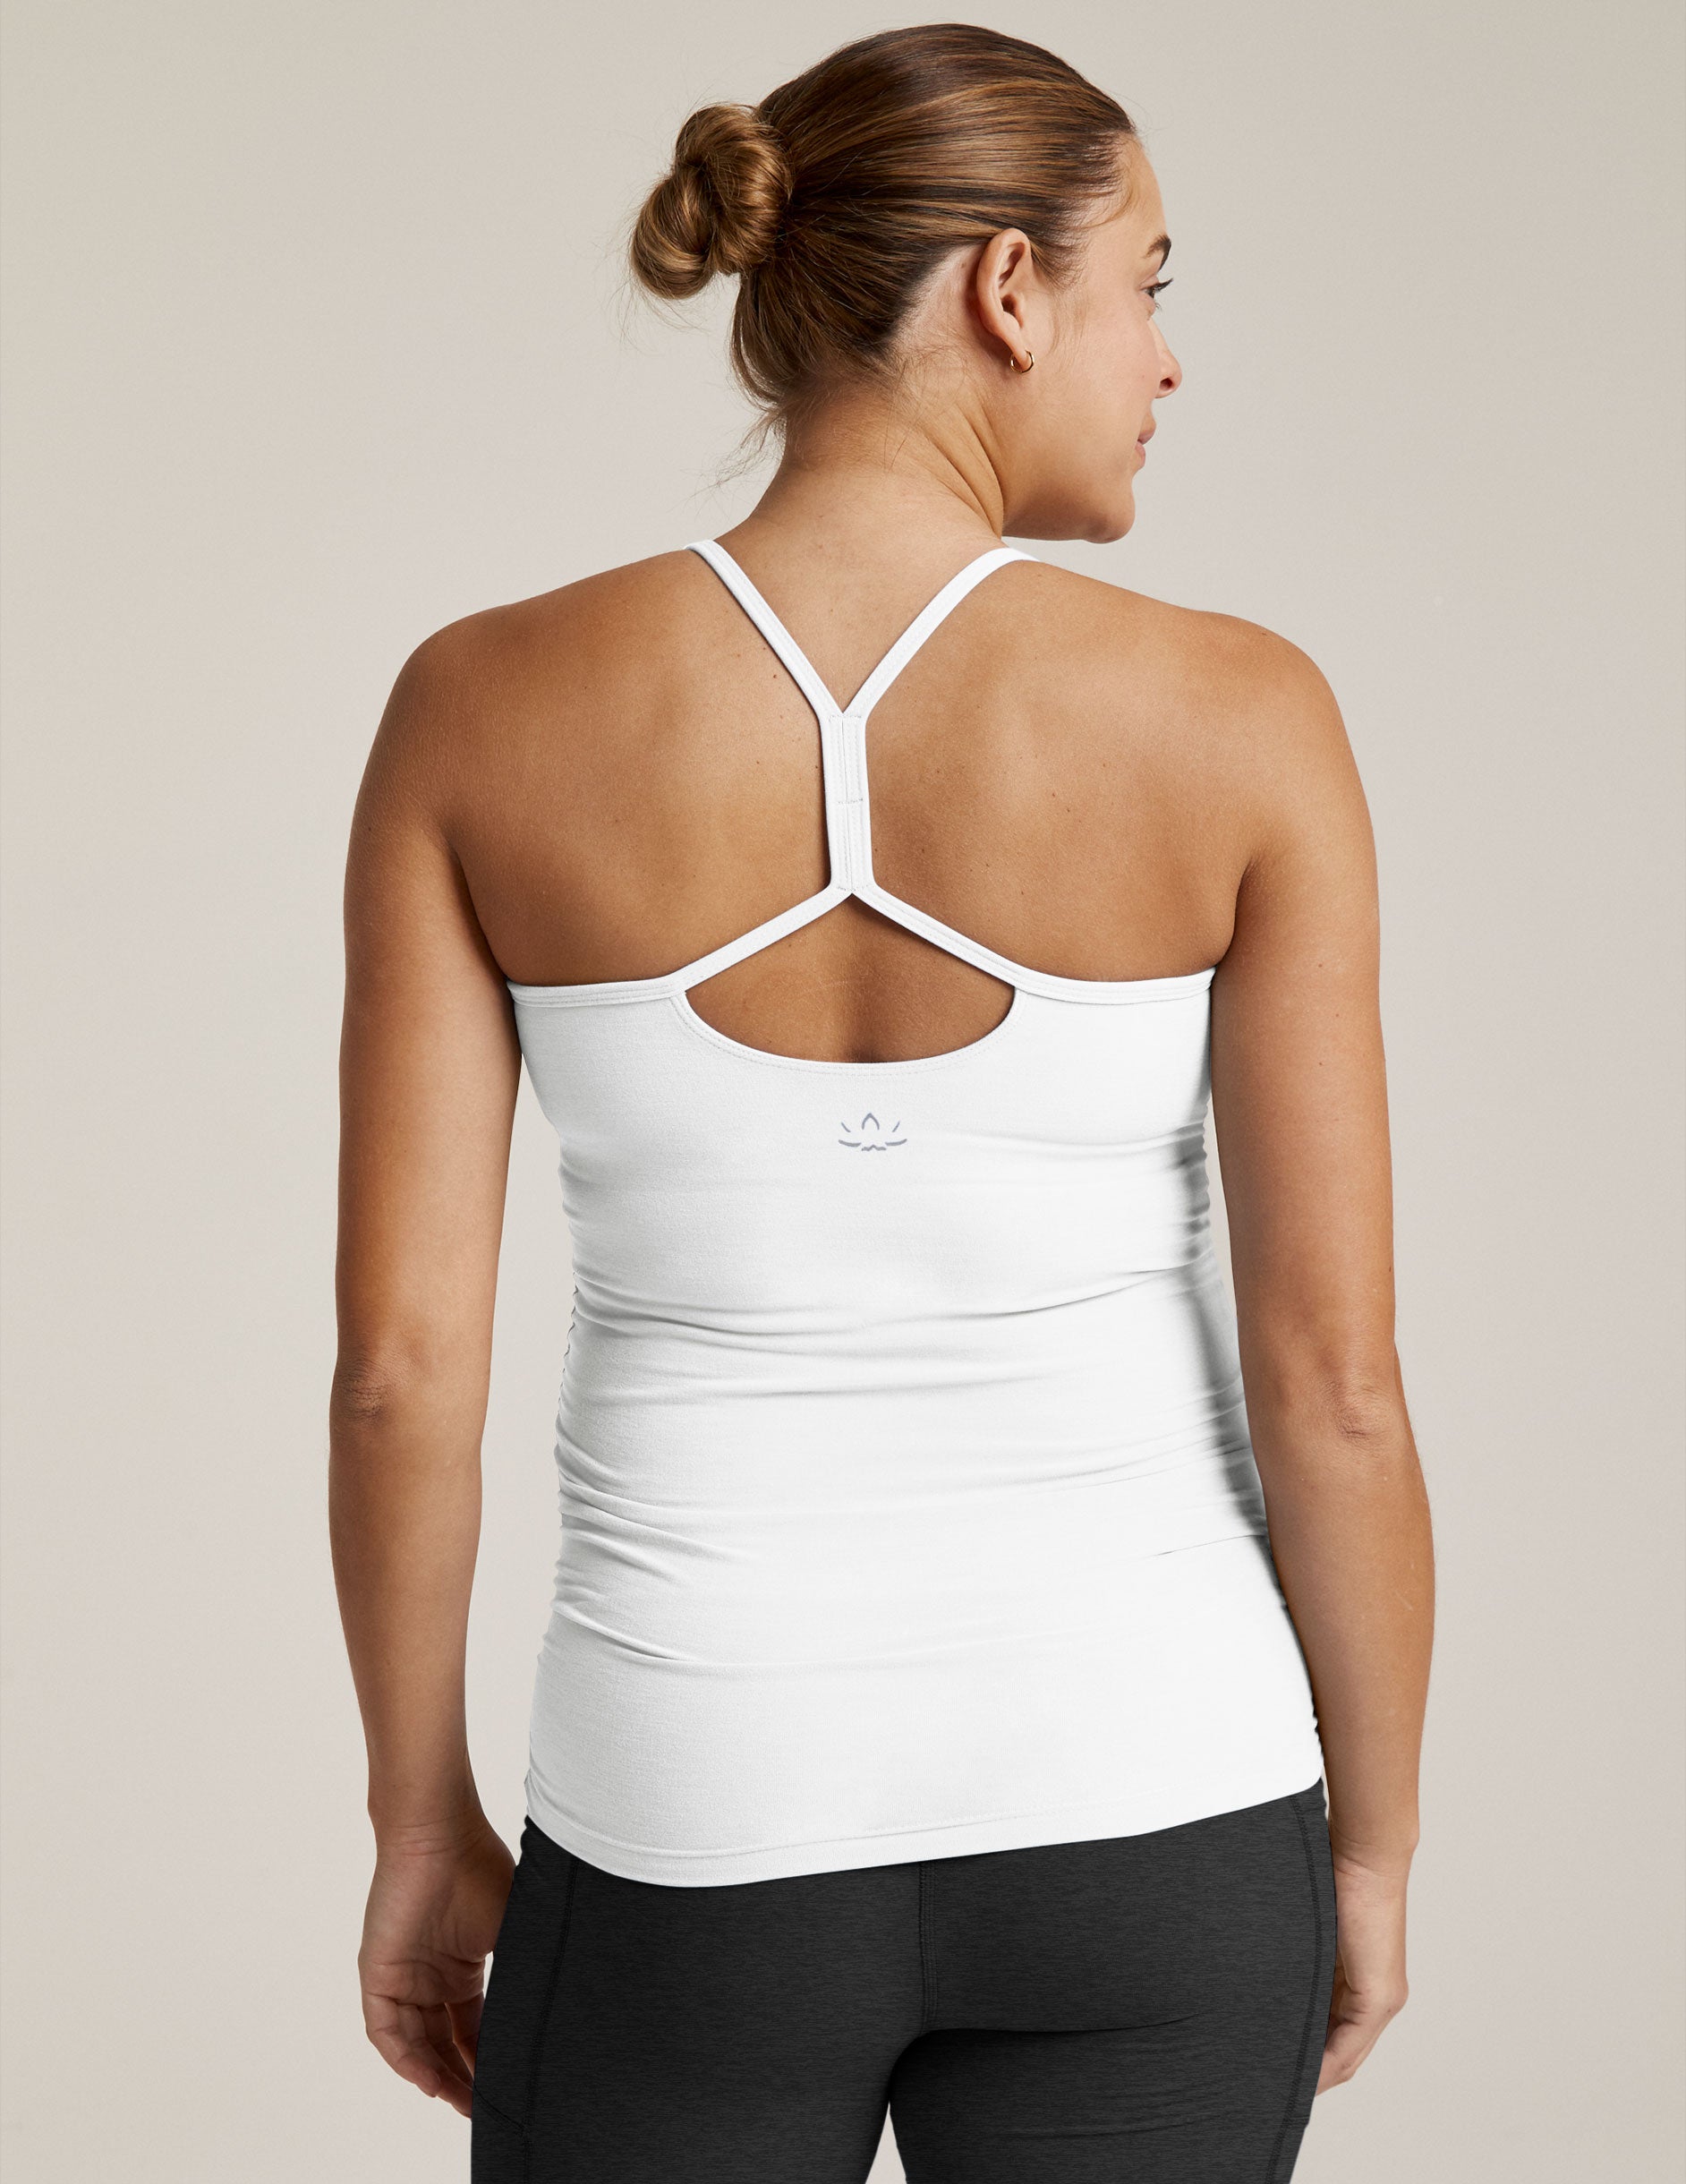 Keeping a white swiftly (or other lululemon) WHITE- can it be done